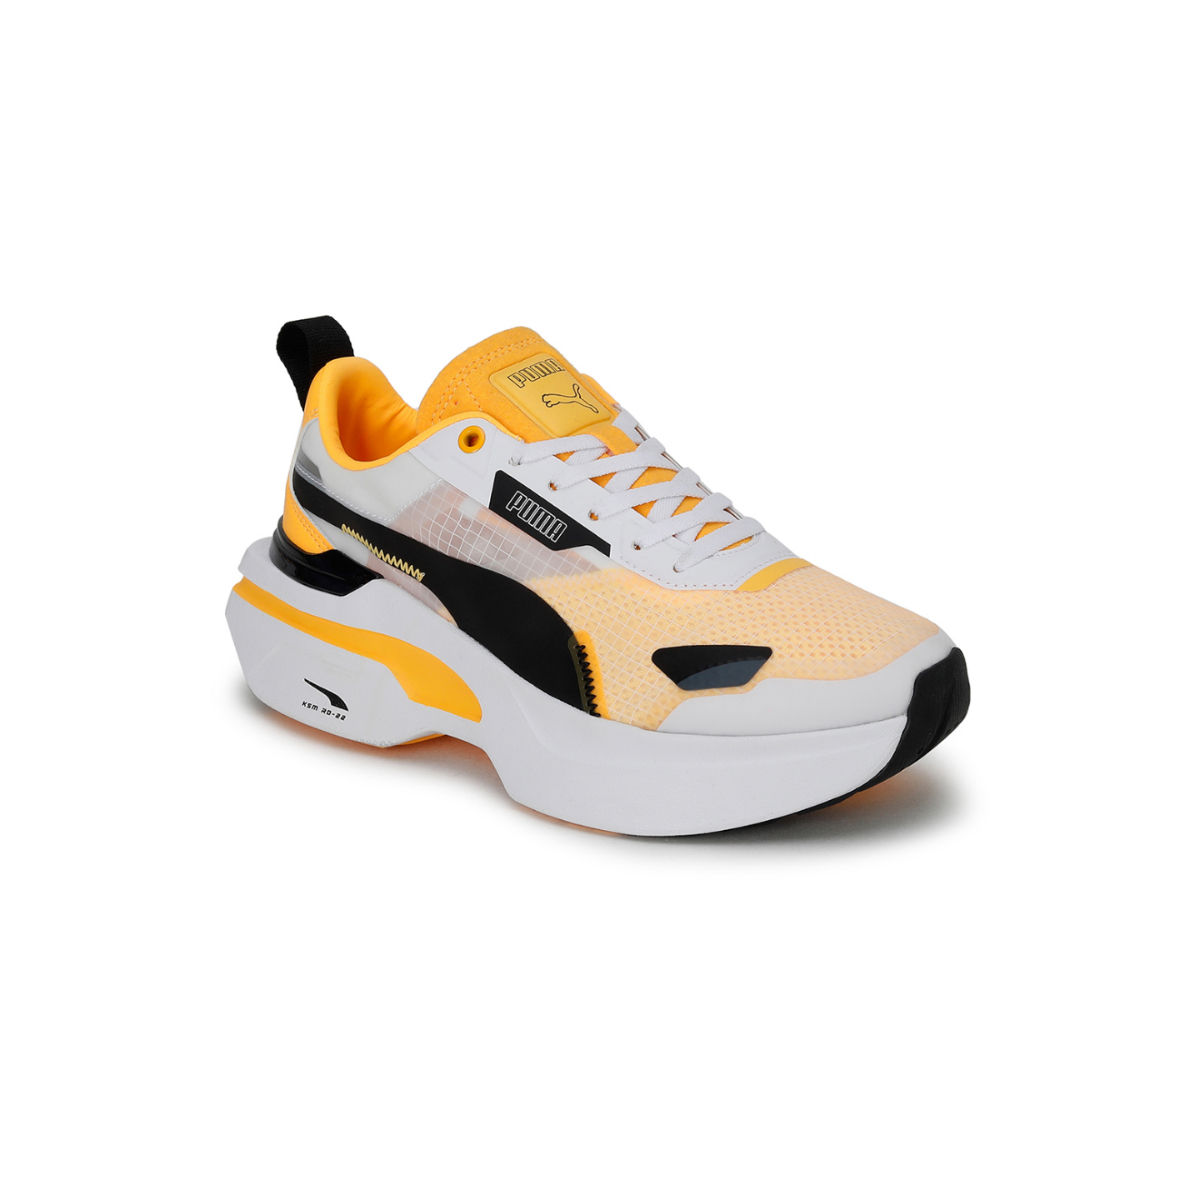 PUMA FUTURE RIDER PLAY ON Sneakers For Men - Buy PUMA FUTURE RIDER PLAY ON  Sneakers For Men Online at Best Price - Shop Online for Footwears in India  | Flipkart.com